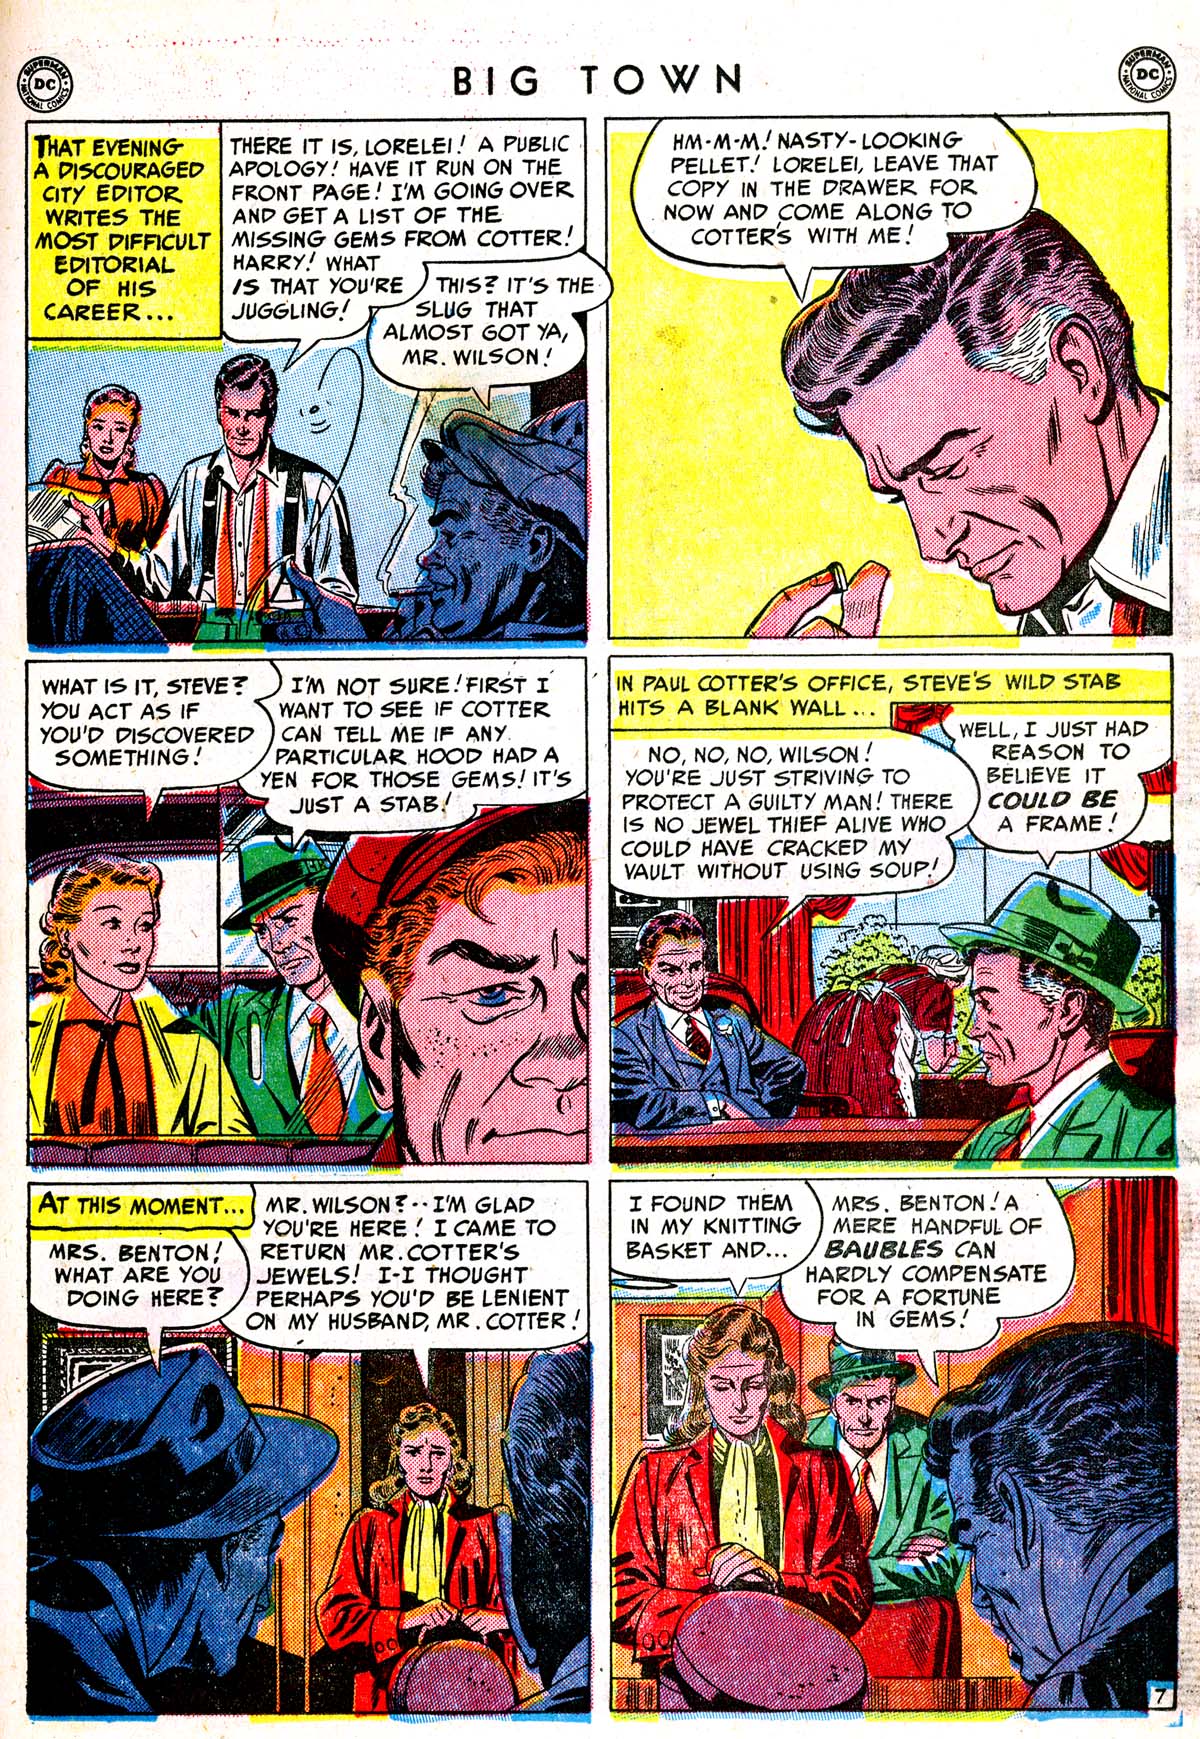 Big Town (1951) 1 Page 20